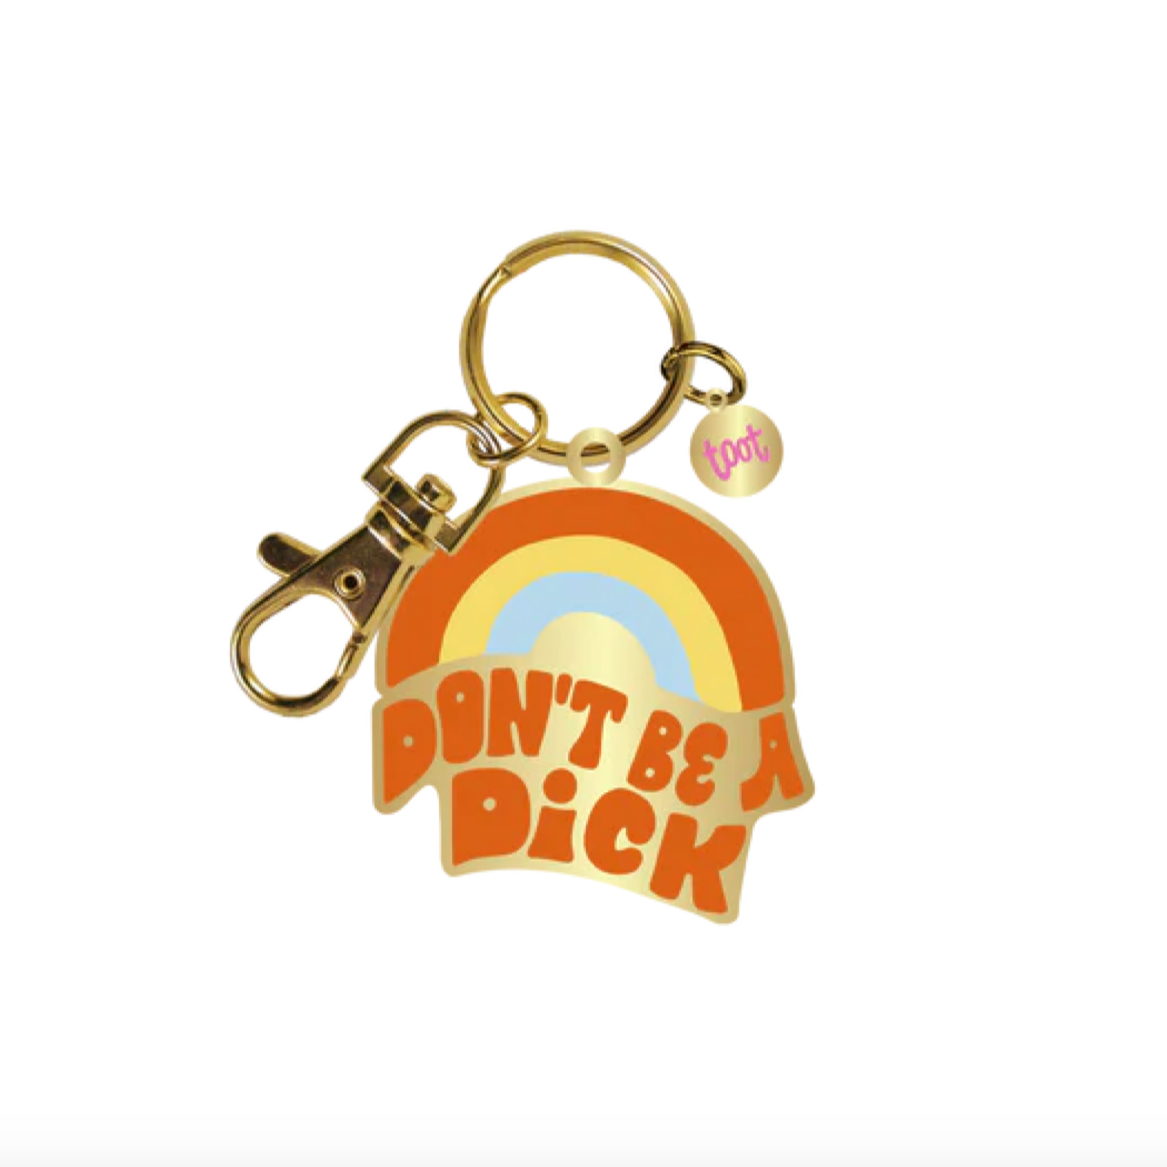 Don't Be A Dick Keychain PRE ORDER